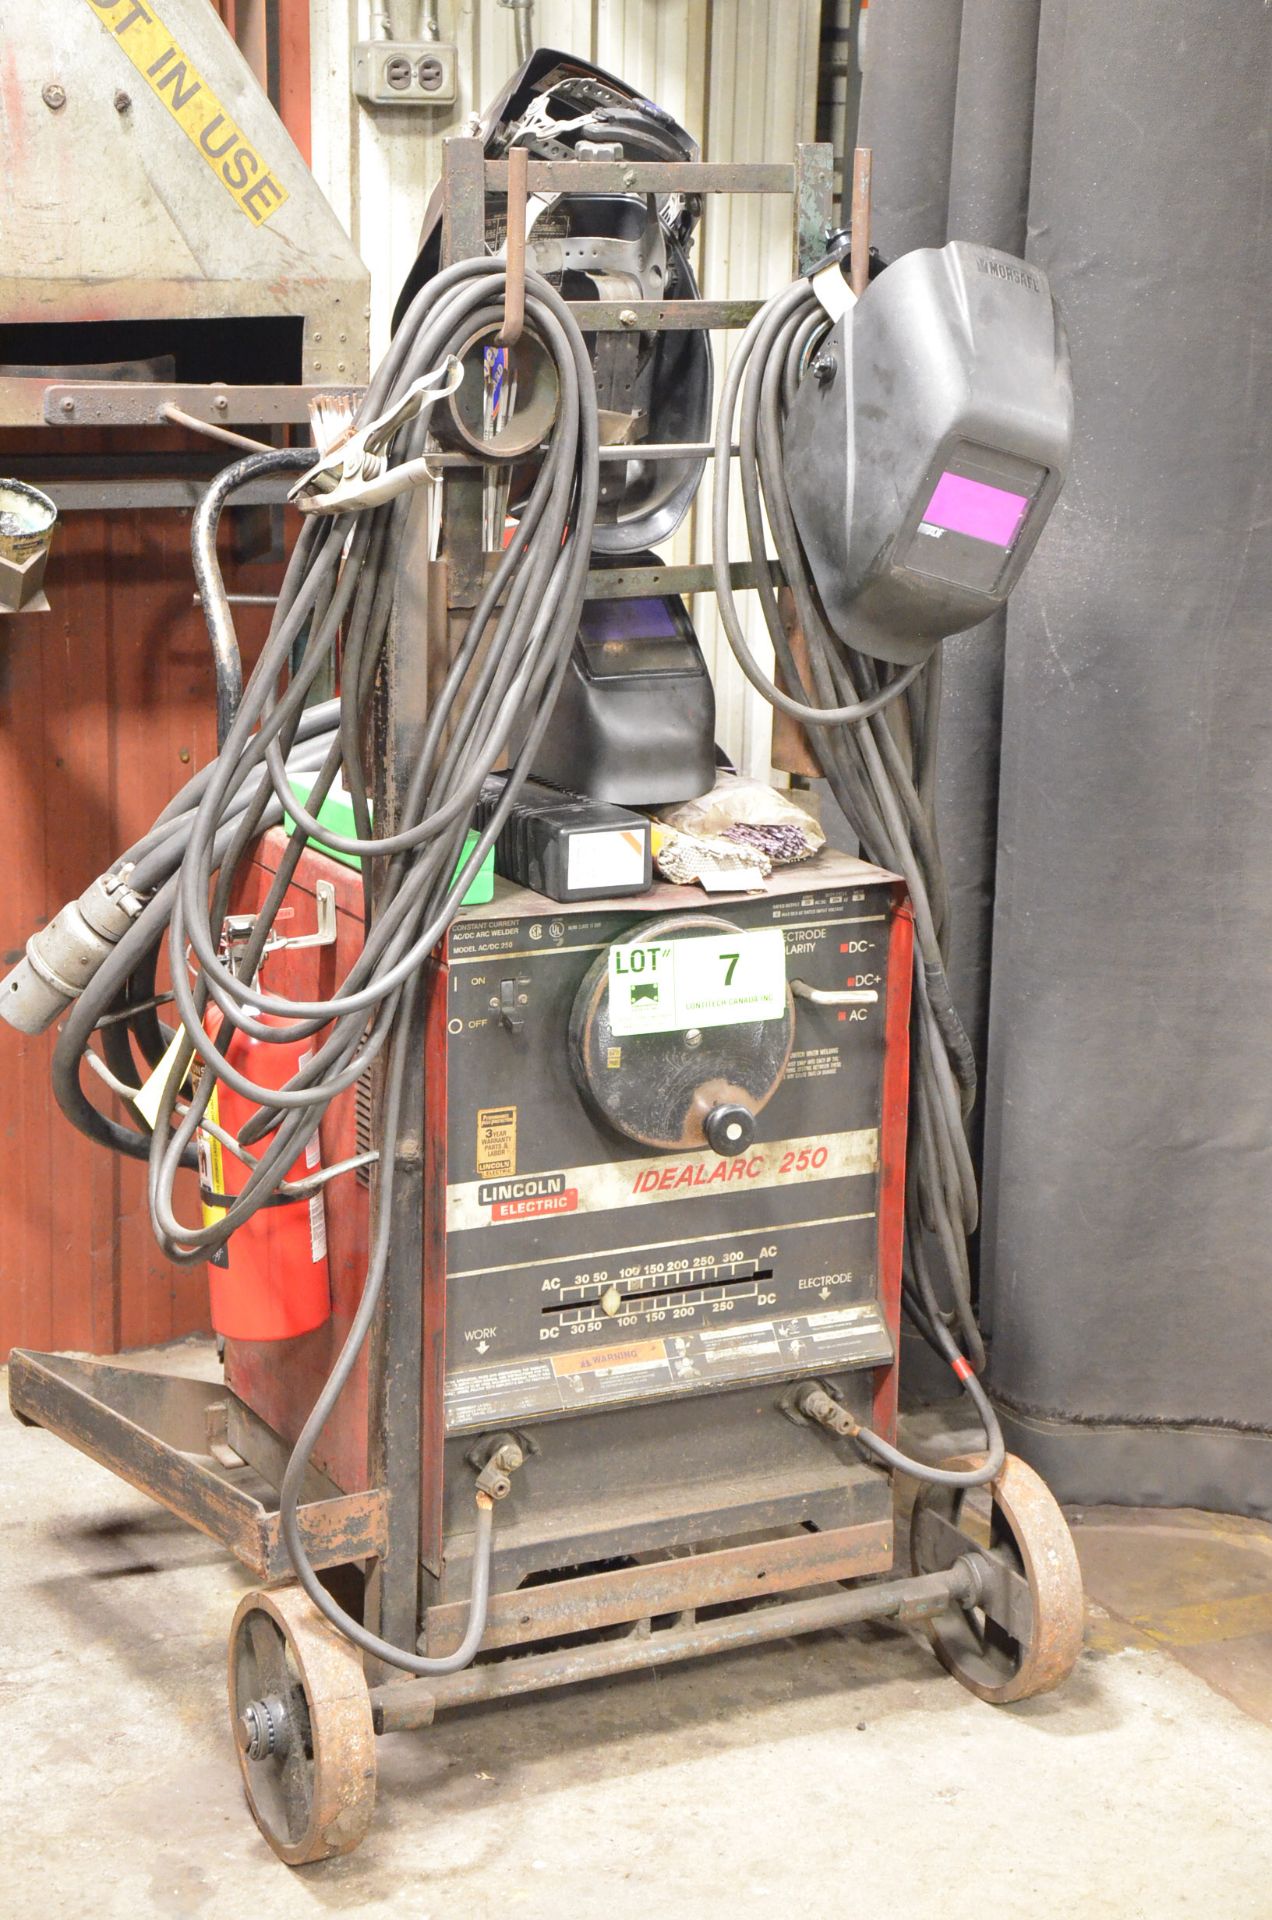 LINCOLN ELECTRIC IDEALARC 250 PORTABLE ARC WELDER WITH CABLES, GUN, AND WELDING SUPPLIES, S/N N/A [